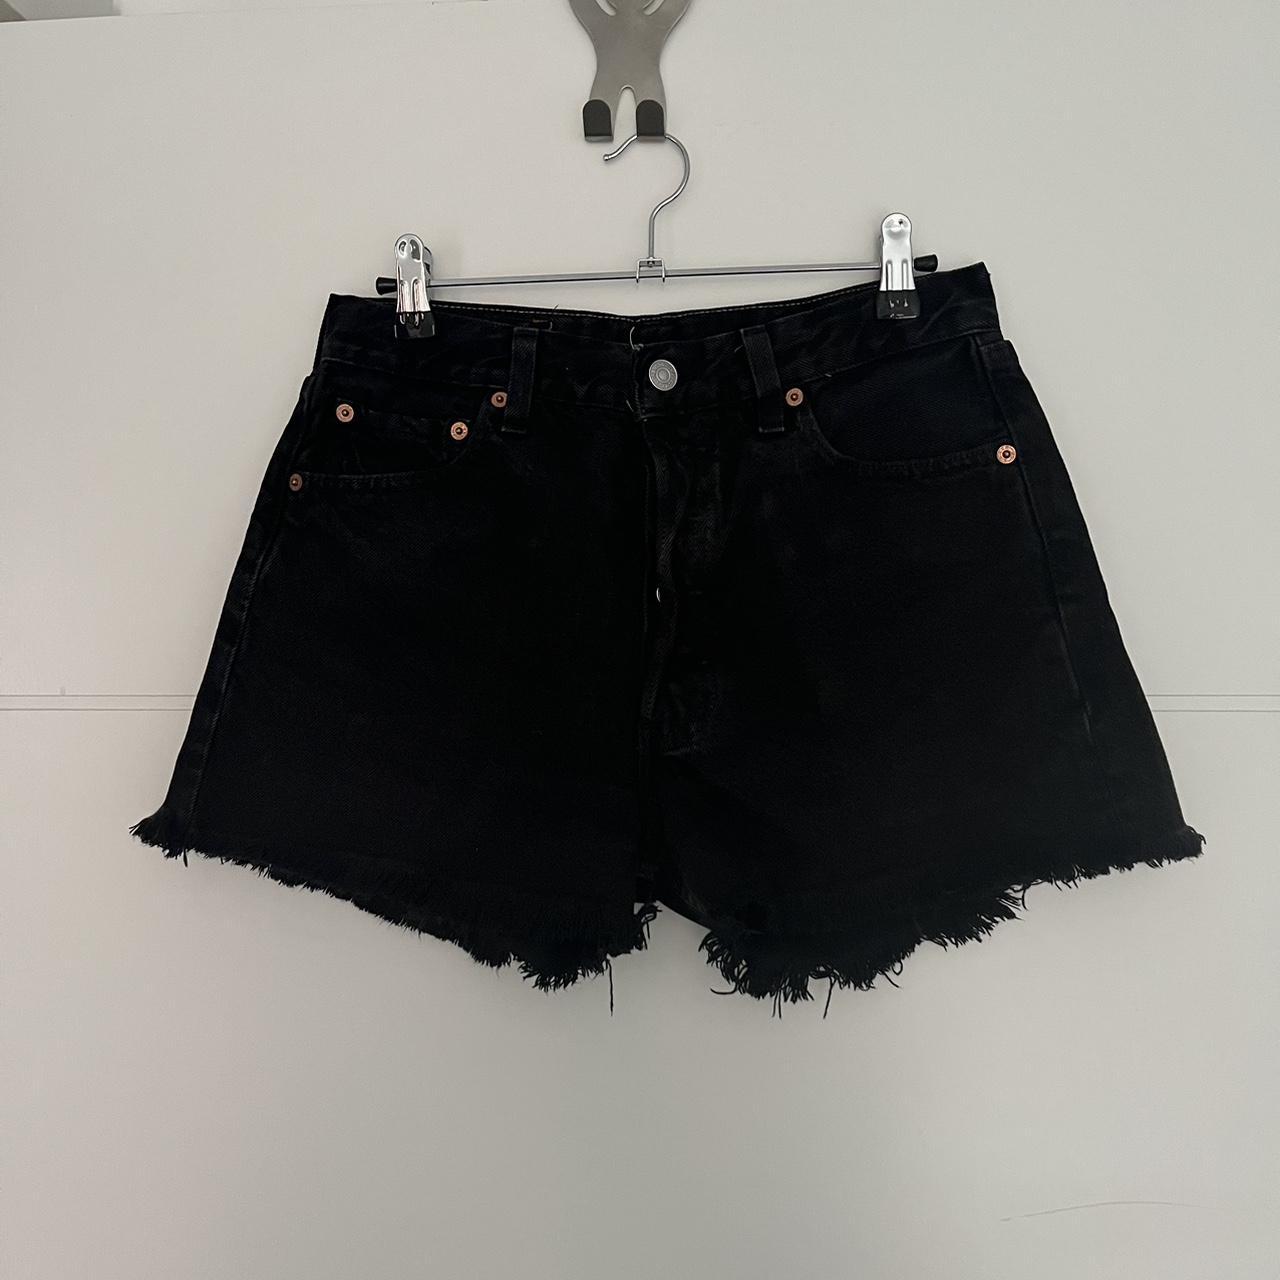 ‘Overdyed’ black Levis shorts with button fly,... - Depop